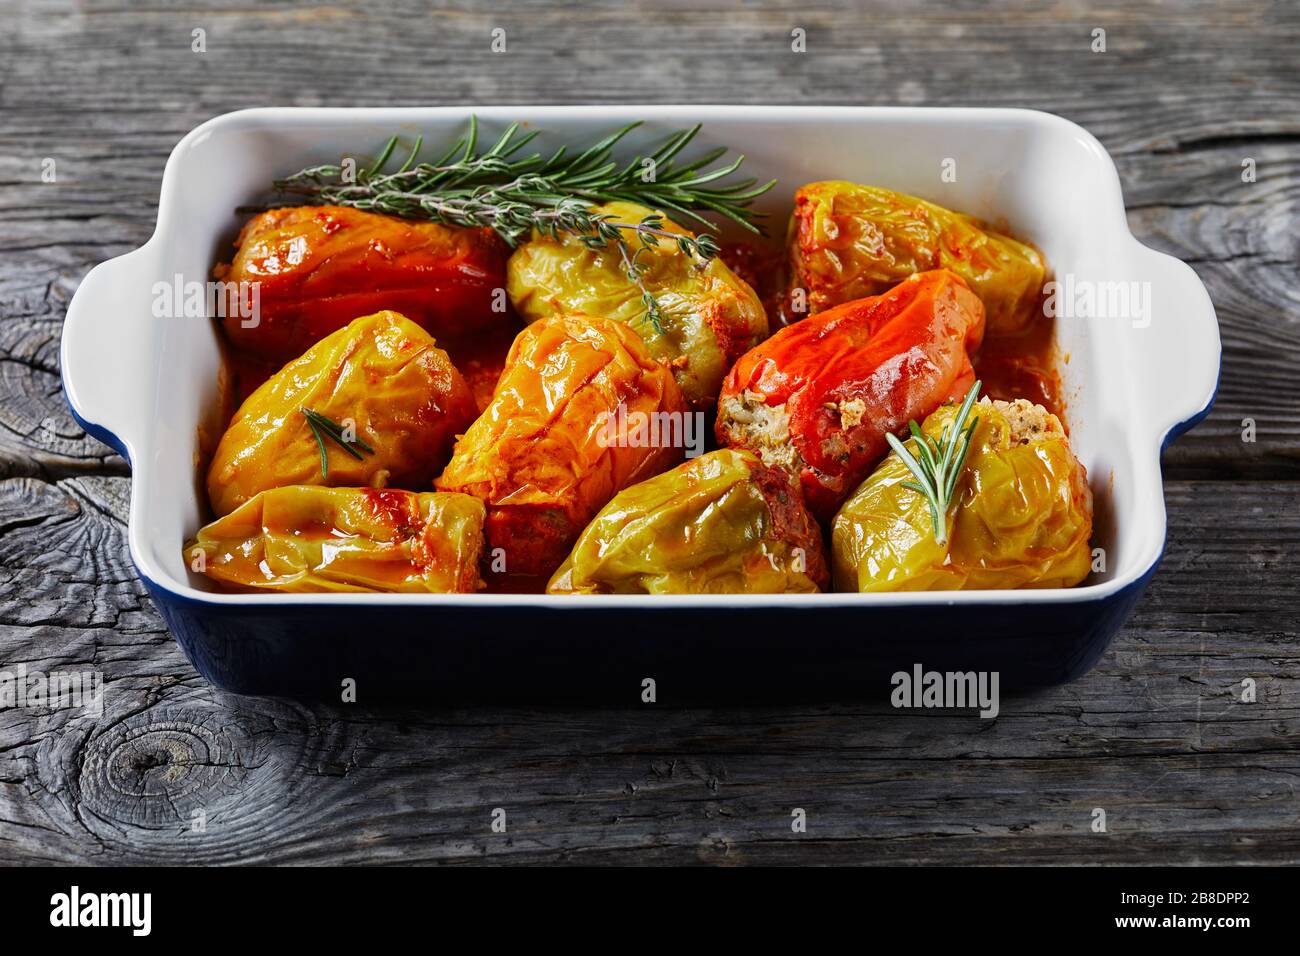 Instant pot sweet peppers stuffed with rice and minced meat: beef and pork with tomato sauce, rosemary, and thyme, cajun spices on a baking dish, on a Stock Photo